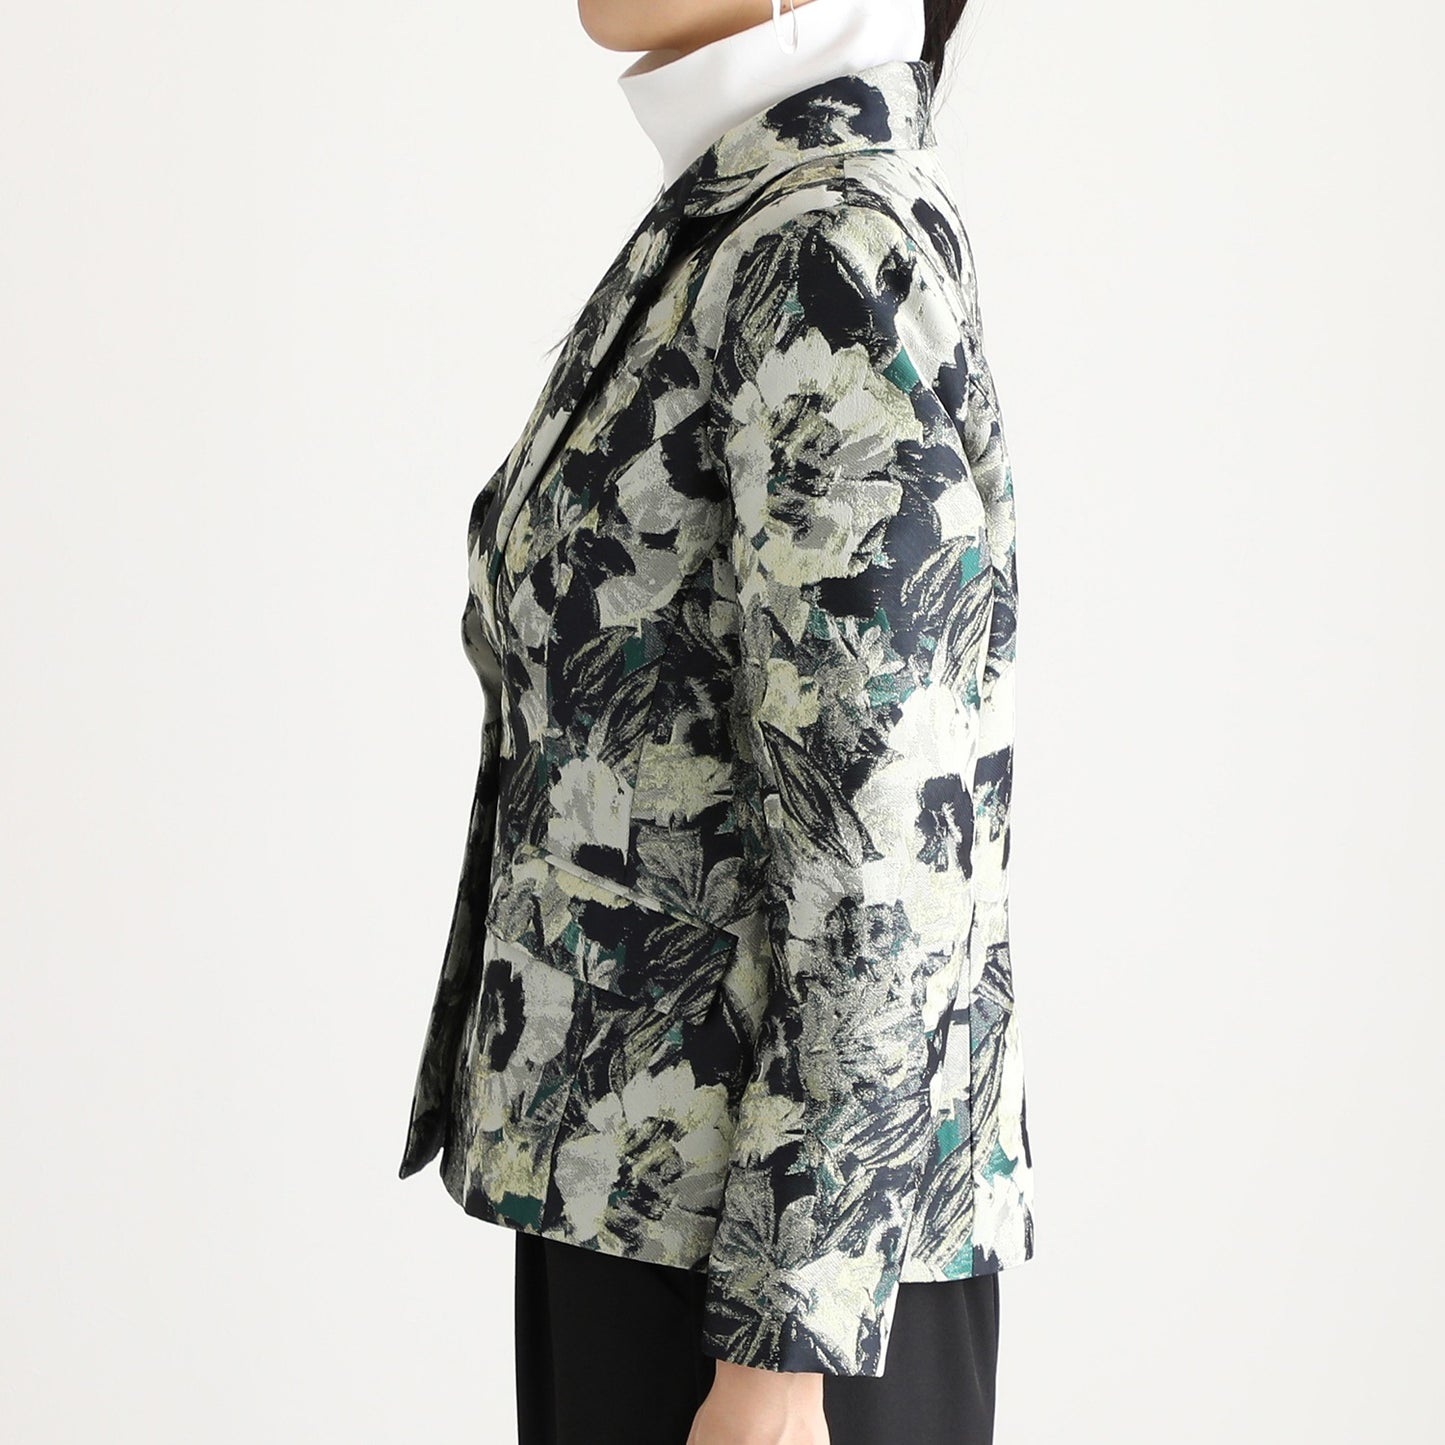 Tailored Jacket in Navy and Sage Floral